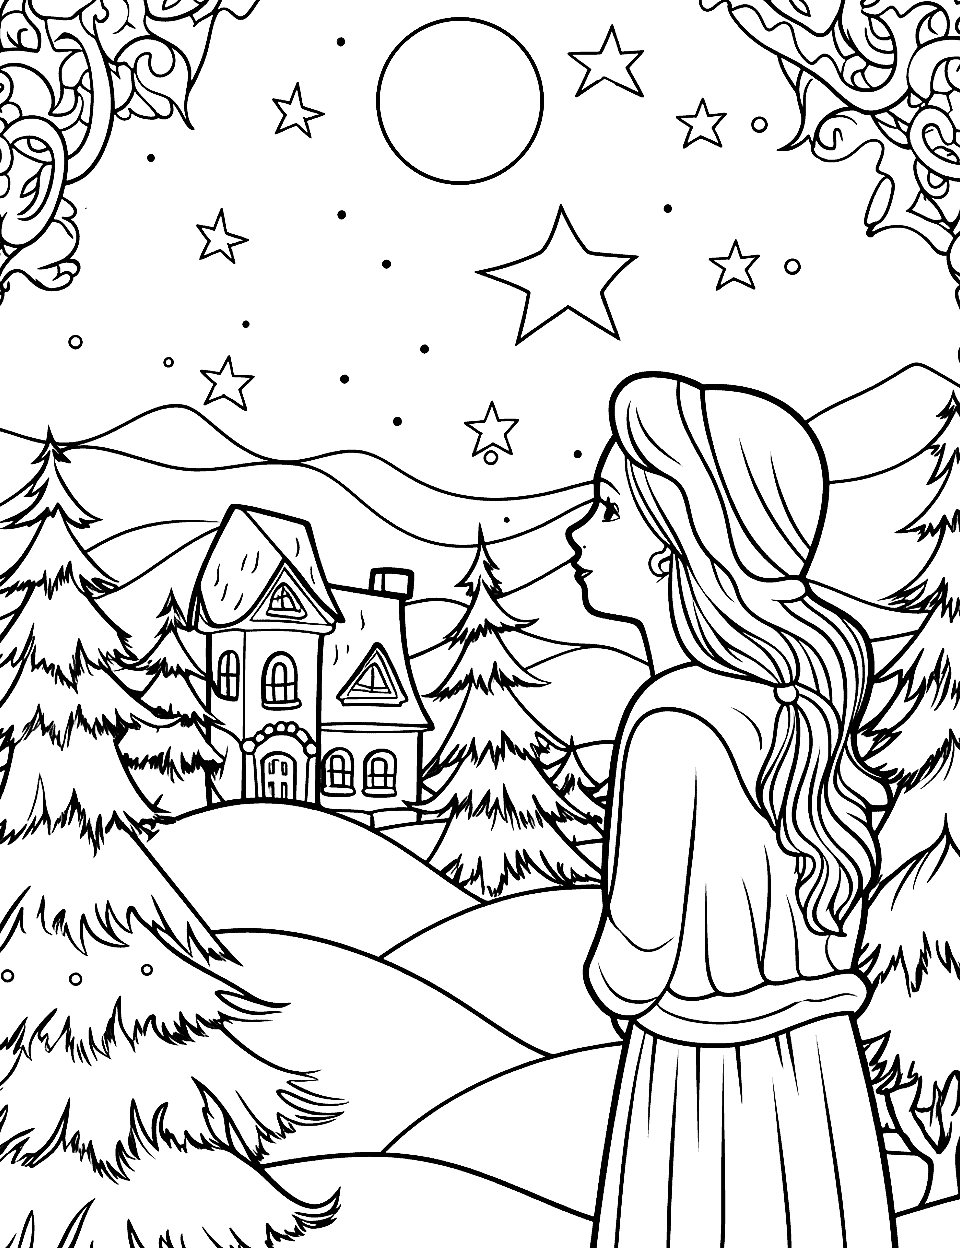 Moonlit Christmas Eve Adult Coloring Page - A detailed scene of a Christmas Eve under a moonlit sky.